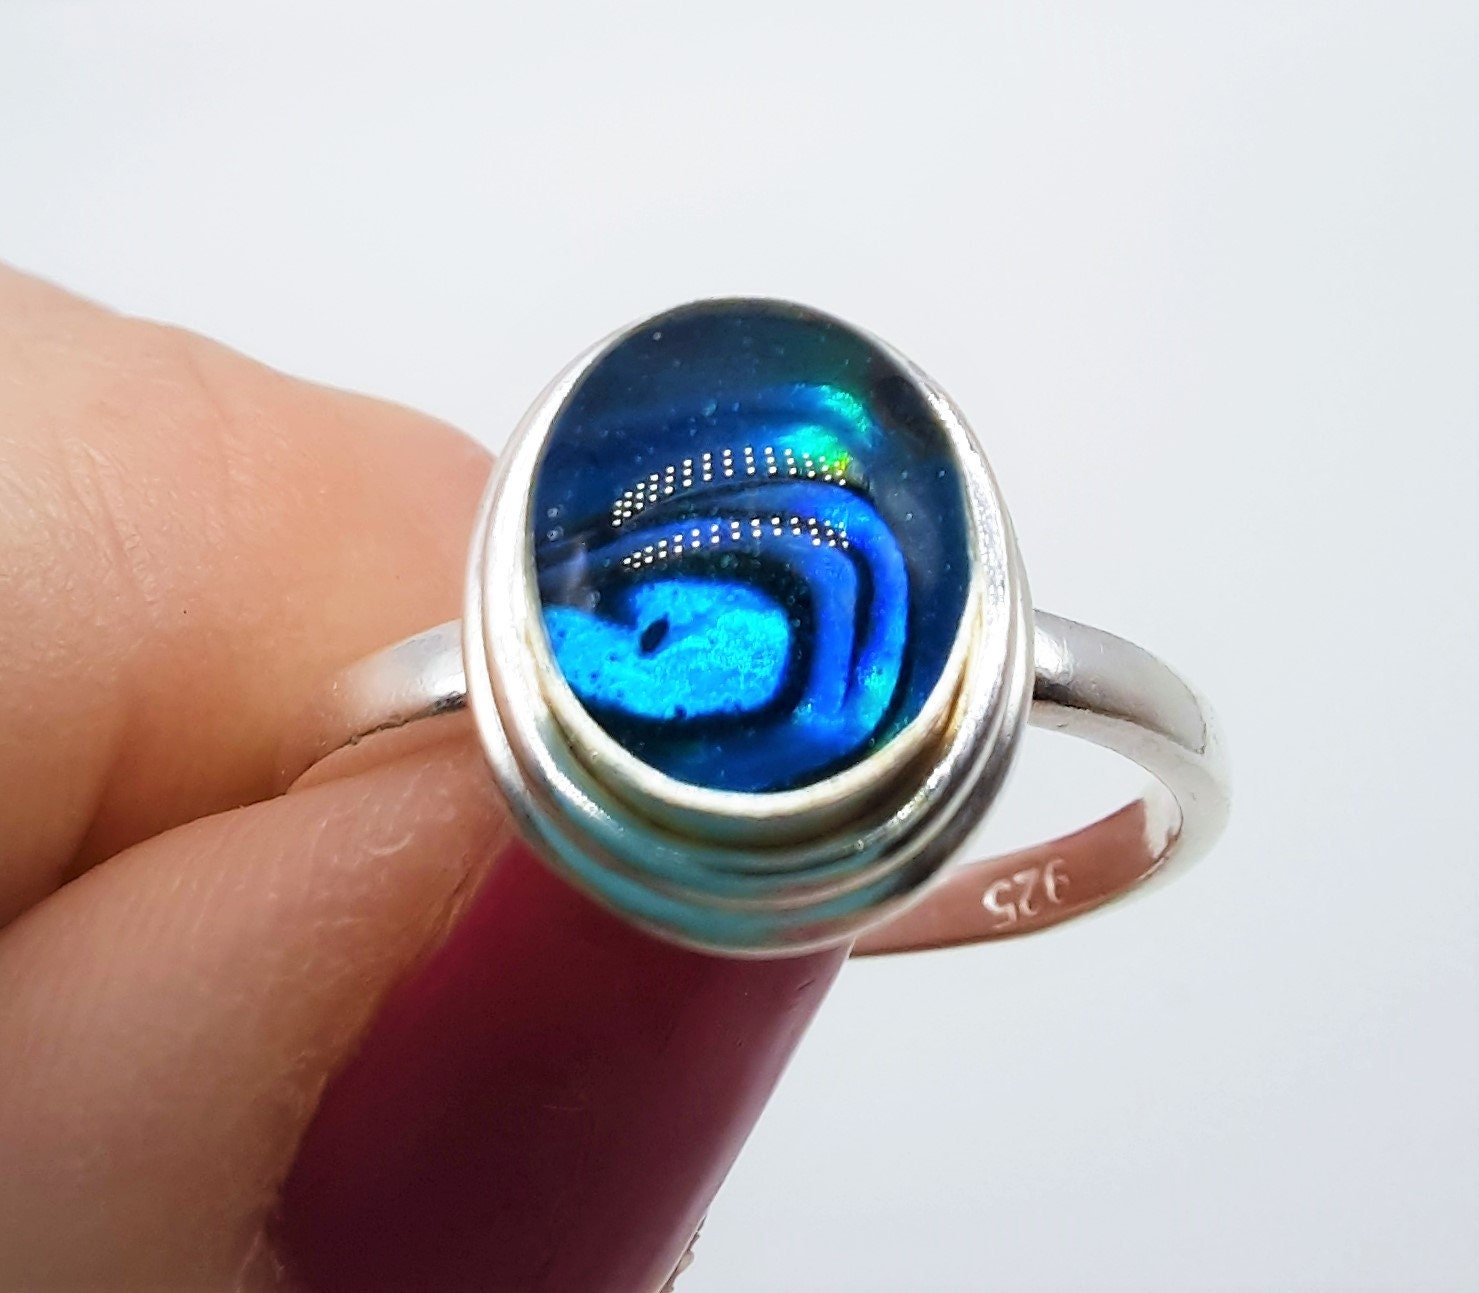 Handmade / Handcrafted 925 Sterling Silver Blue Abalone / Paua Seashell Ring, Oval, Sealed with Holographic Mica Infused Resin